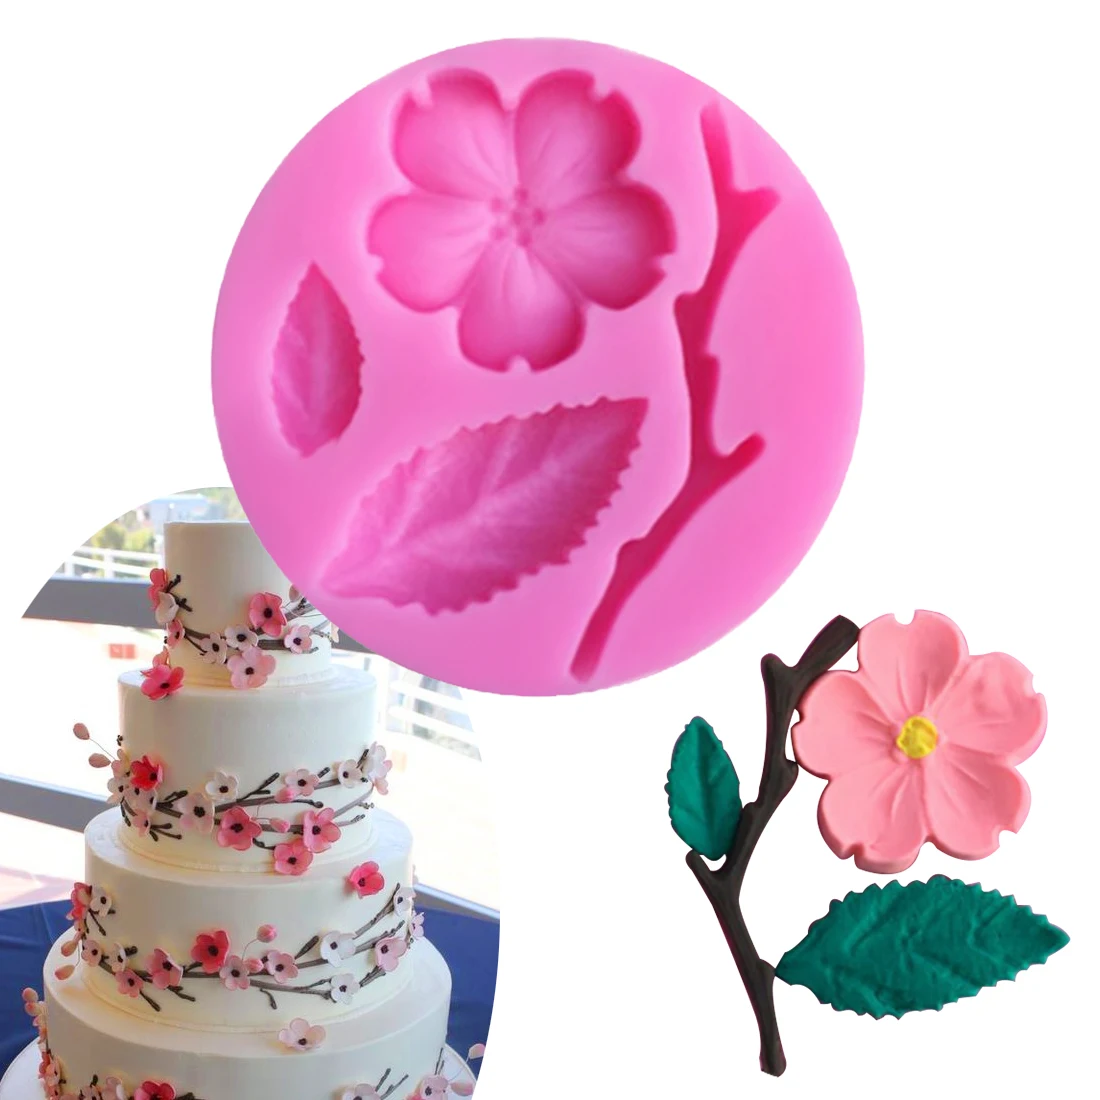 

Candy Mould Peach Blossom Shape Fondant Molds 1PC Cake Decorating Tools Chocolate Mold Soap Cake Stencils Kitchen DIY Tools